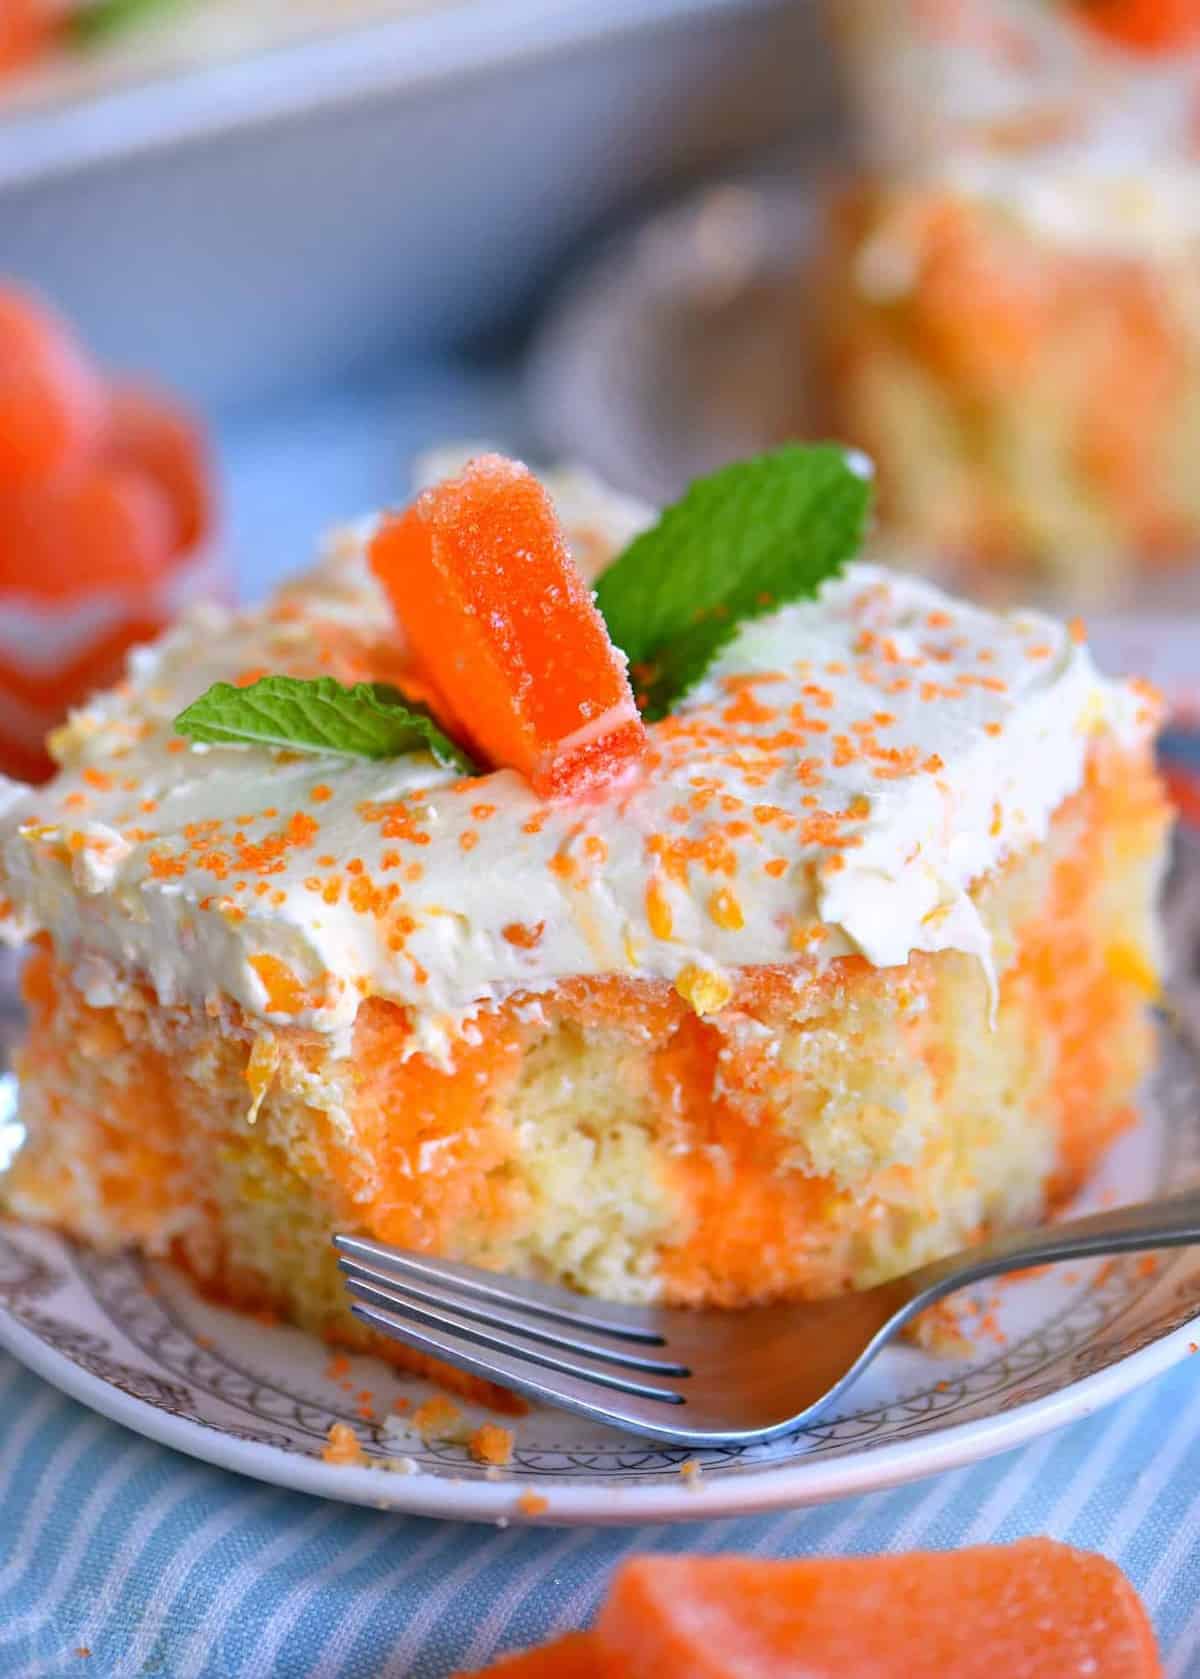 A close up side view of a slice of orange creamsicle cake with mandarin orange frosting on a plate next to a fork.